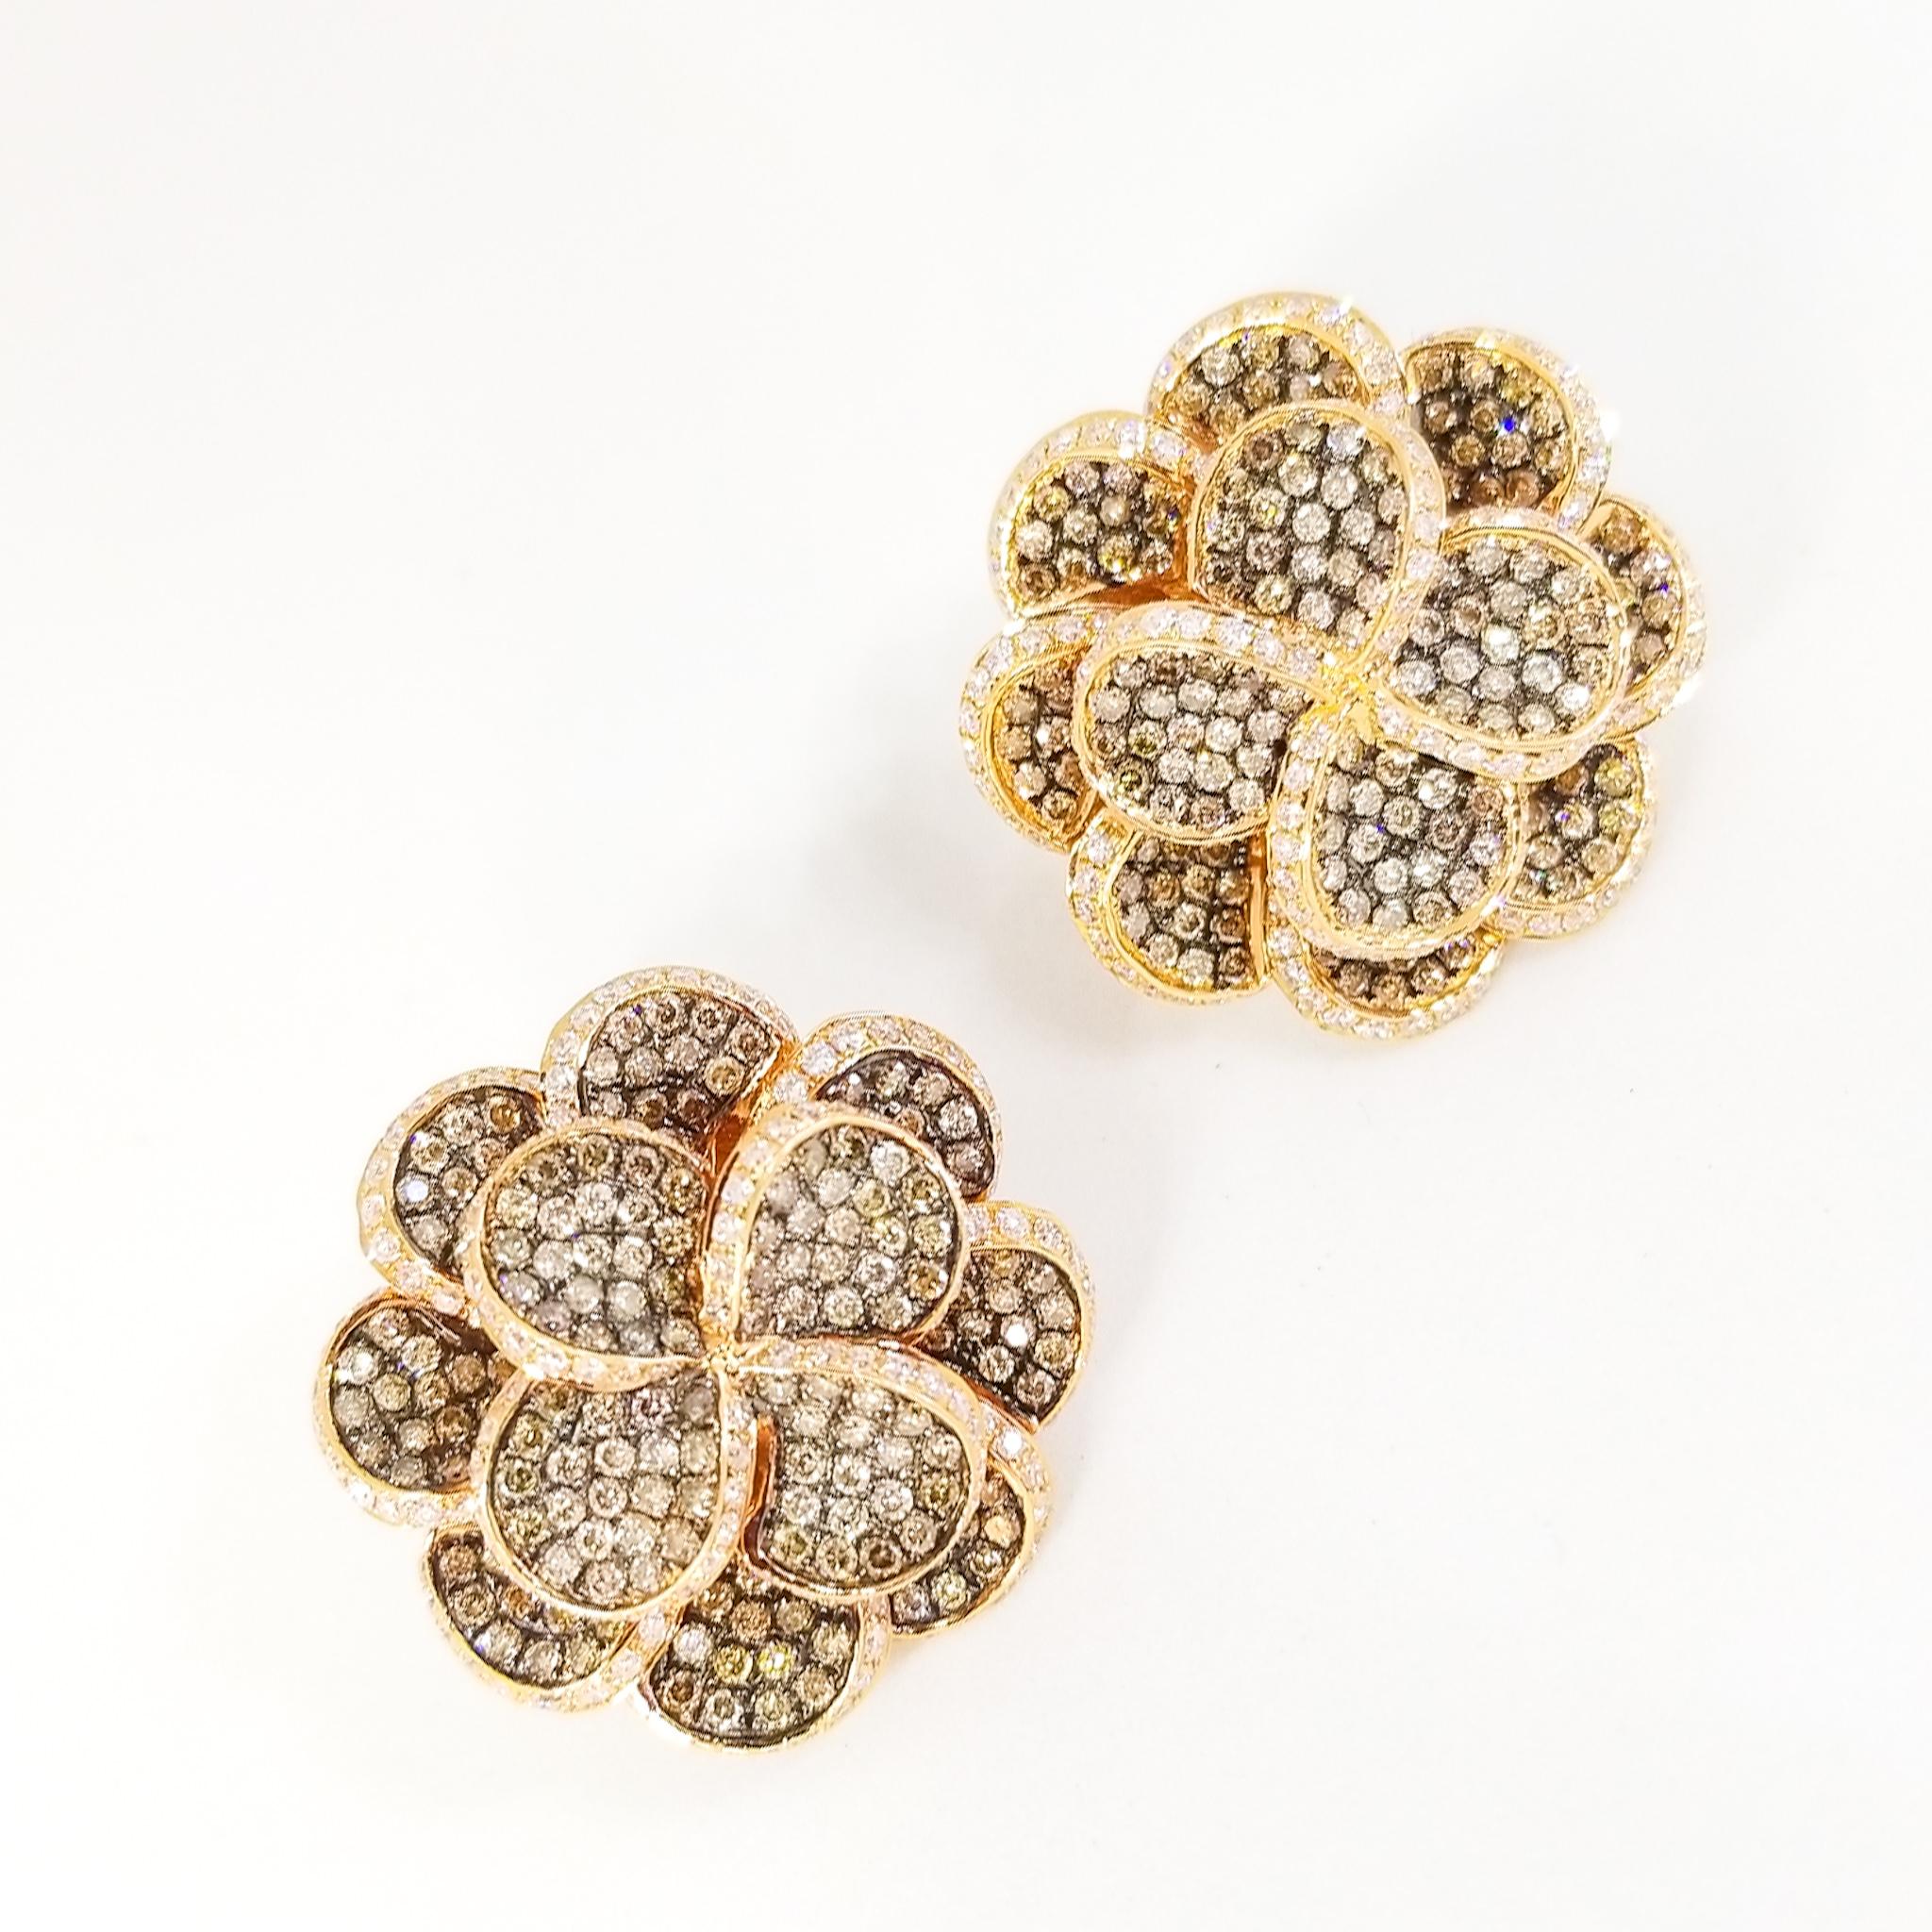 This Stunning pair of Cluster Earrings in Cognac Chocolate Brown and White Diamonds, are crafted in 18K Rose Gold with Precious Black Rhodium accents. The Flower motif Earrings are encrusted with three hundred and ninety-eight Round Brilliant Fancy